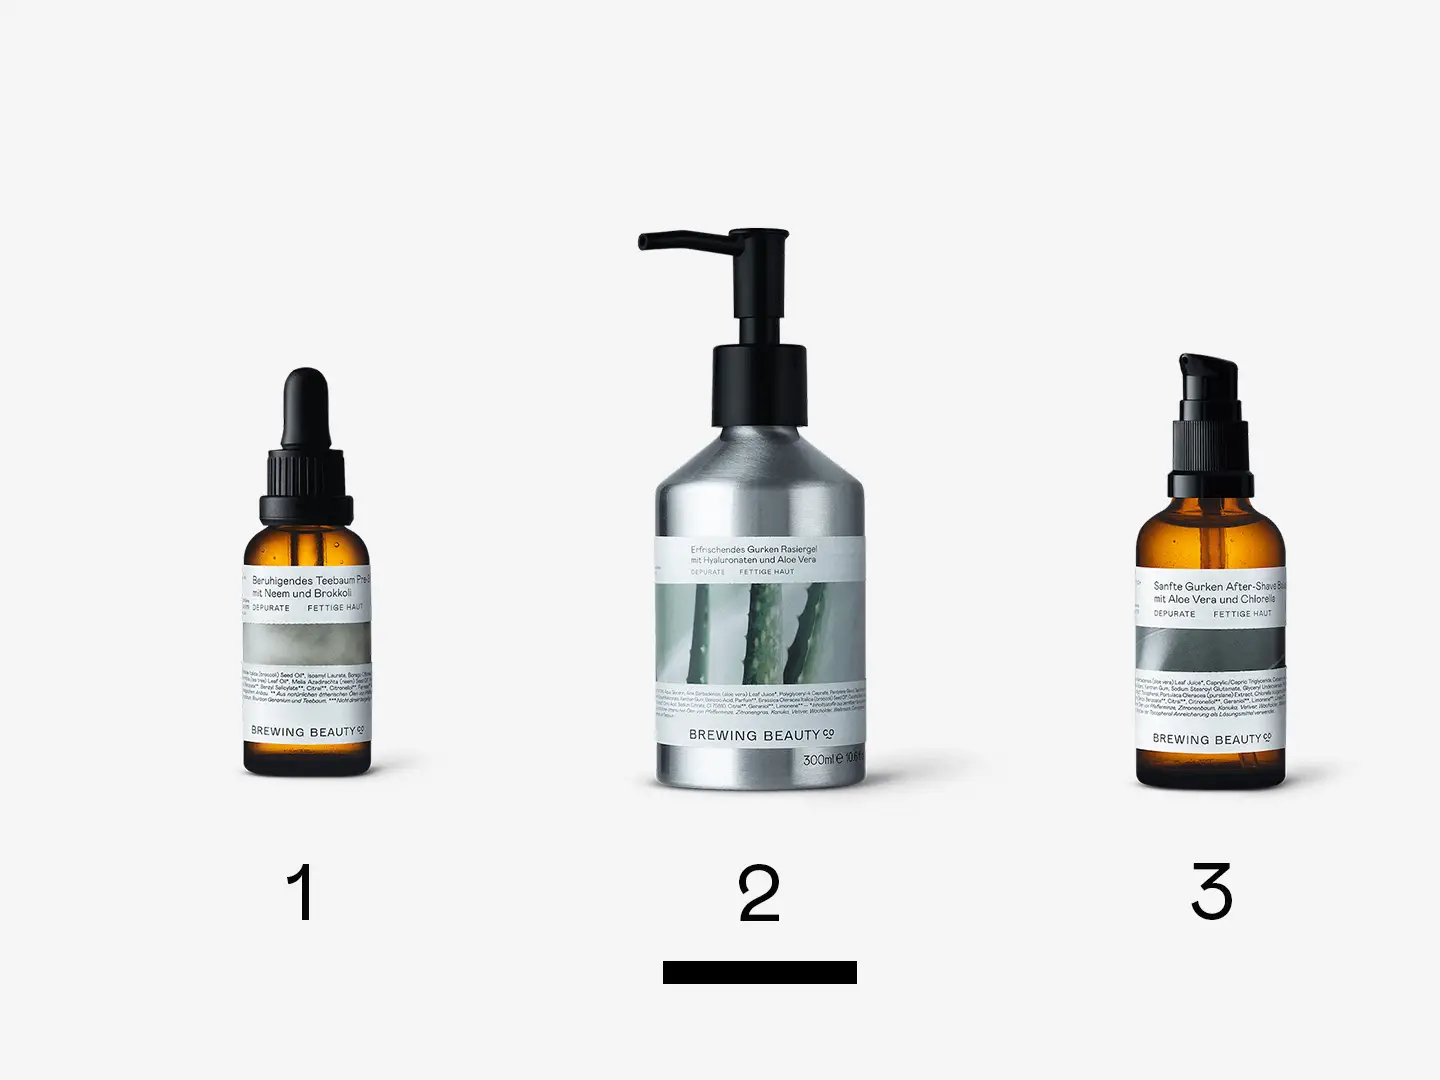 A lineup of Brewing Beauty products representing Routine No.24 